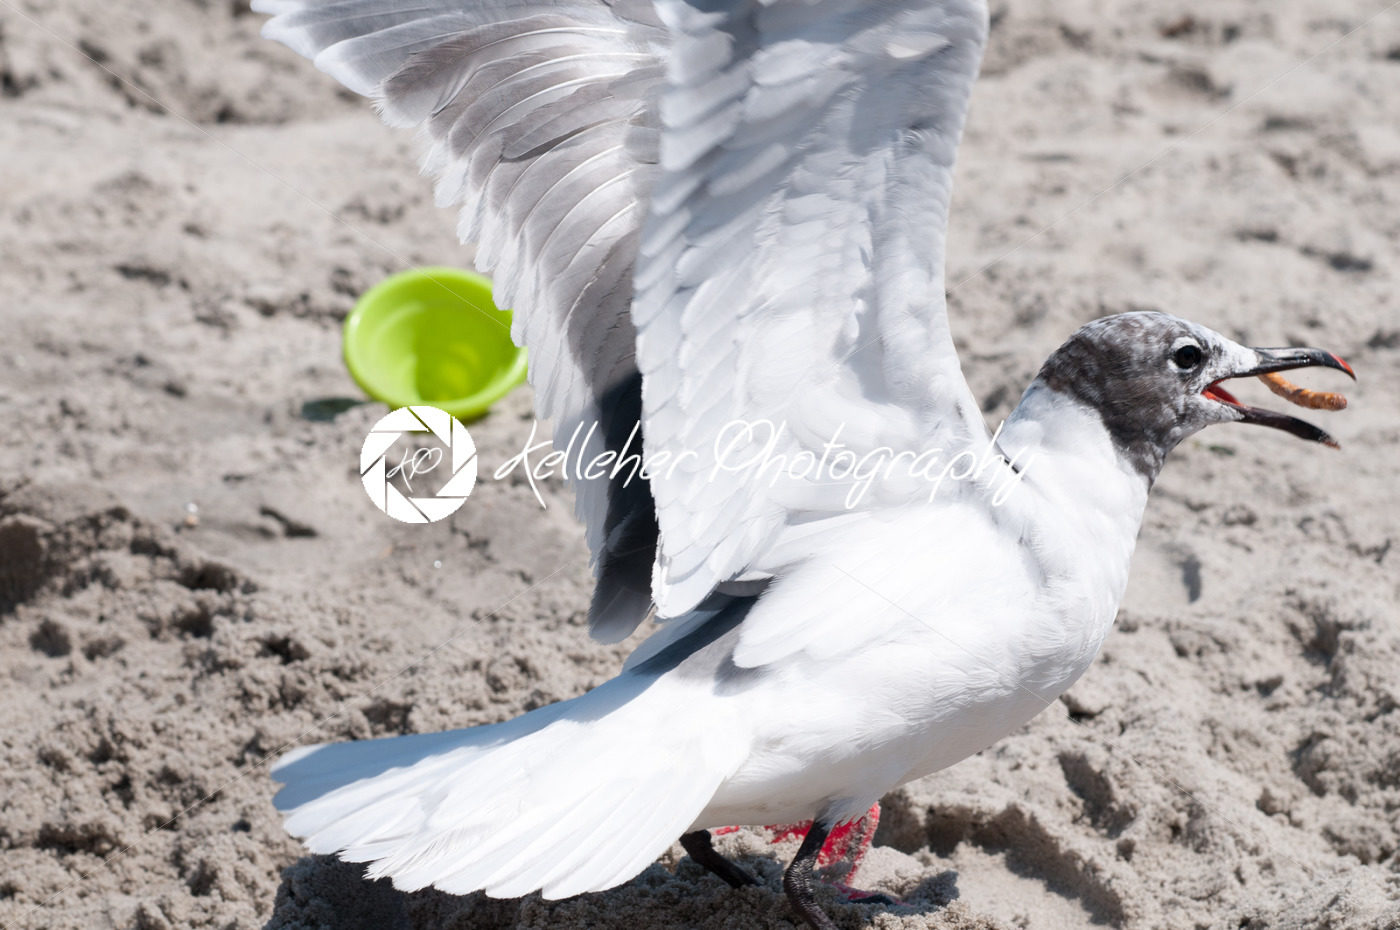 Seagull catching a pretzel in its mouth on the beach in Ocean City, NJ - Kelleher Photography Store